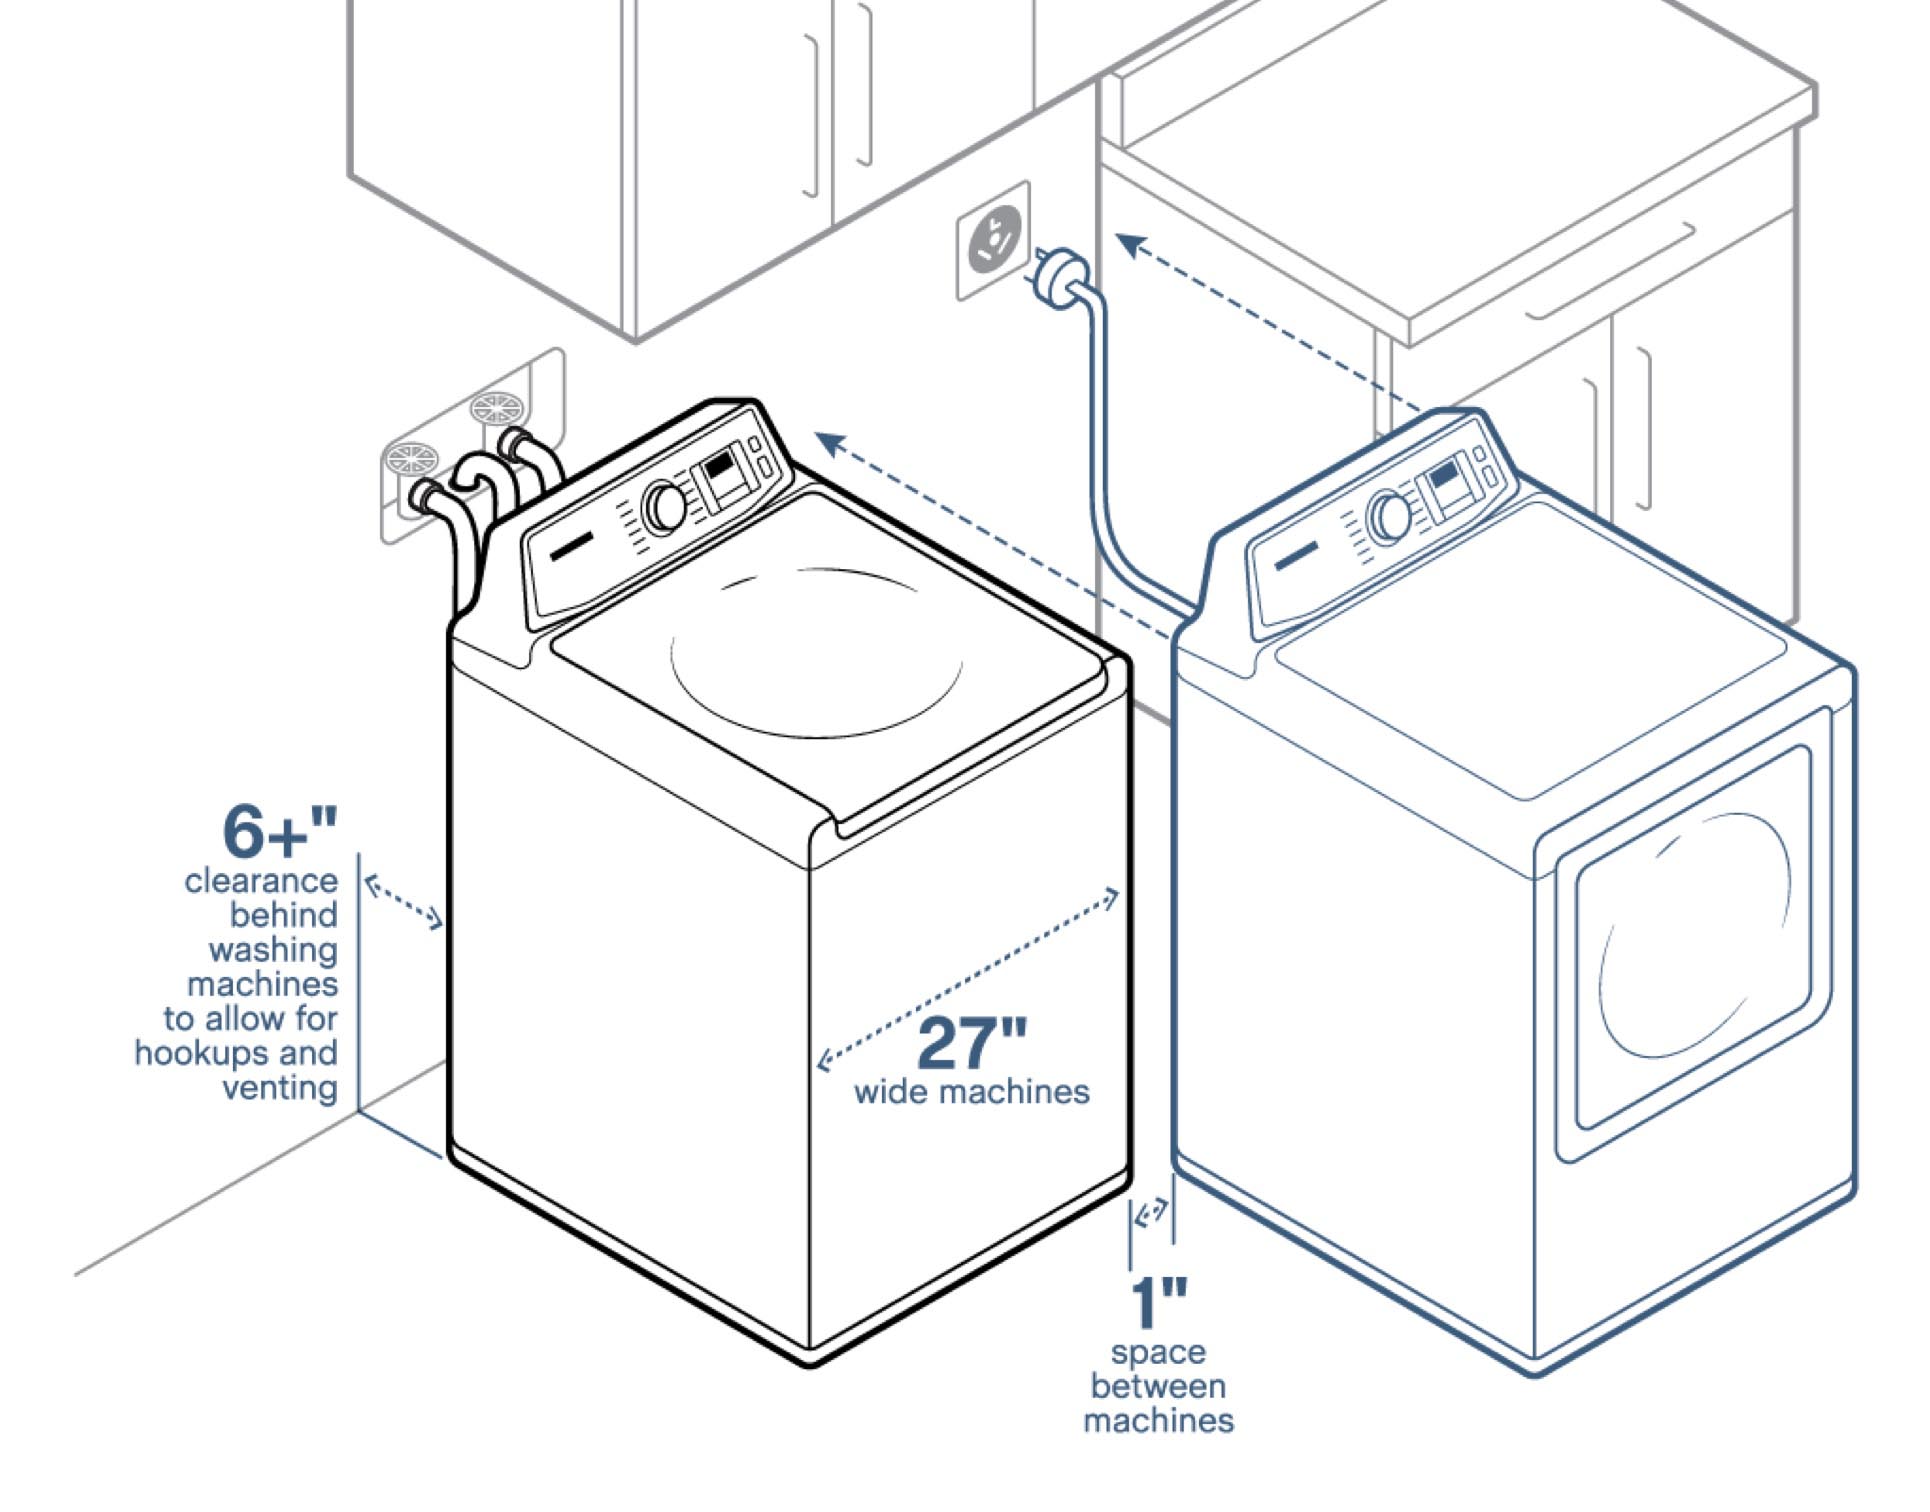 What are washer and dryer dimensions?